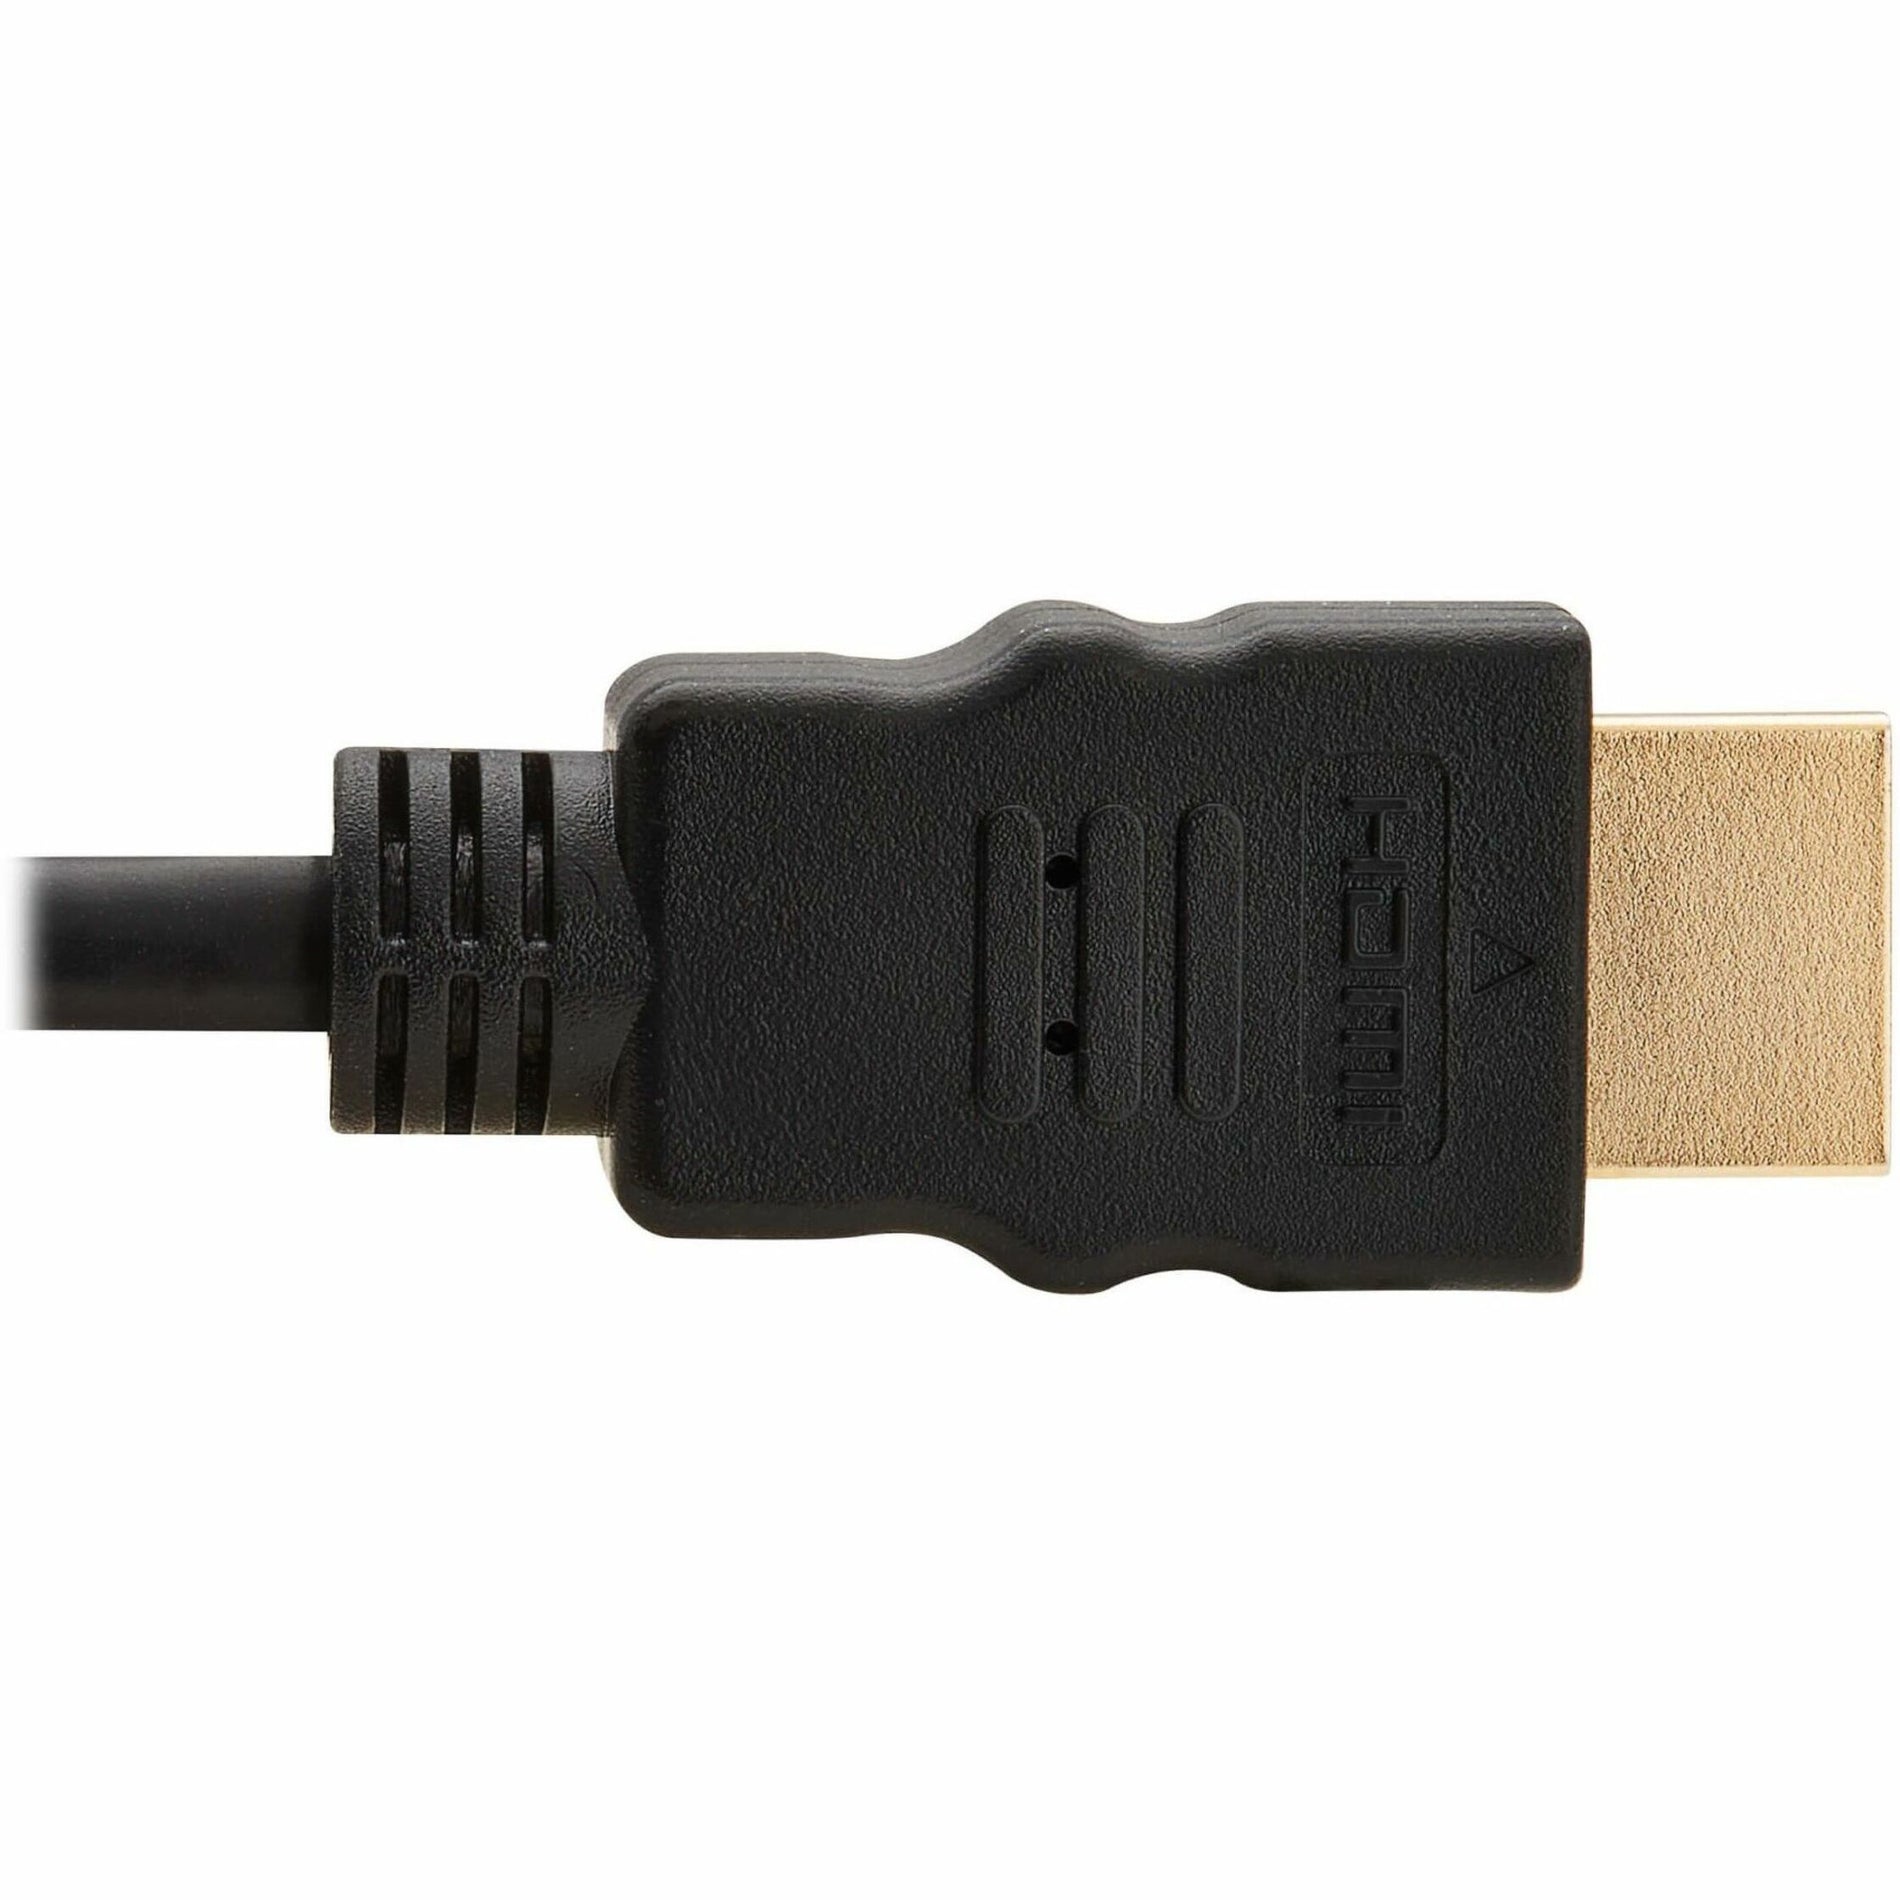 Tripp Lite P568-030 High Speed HDMI Cable, Digital Video with Audio (M/M), 30-ft, Gripping Connector, EMI/RF Protection